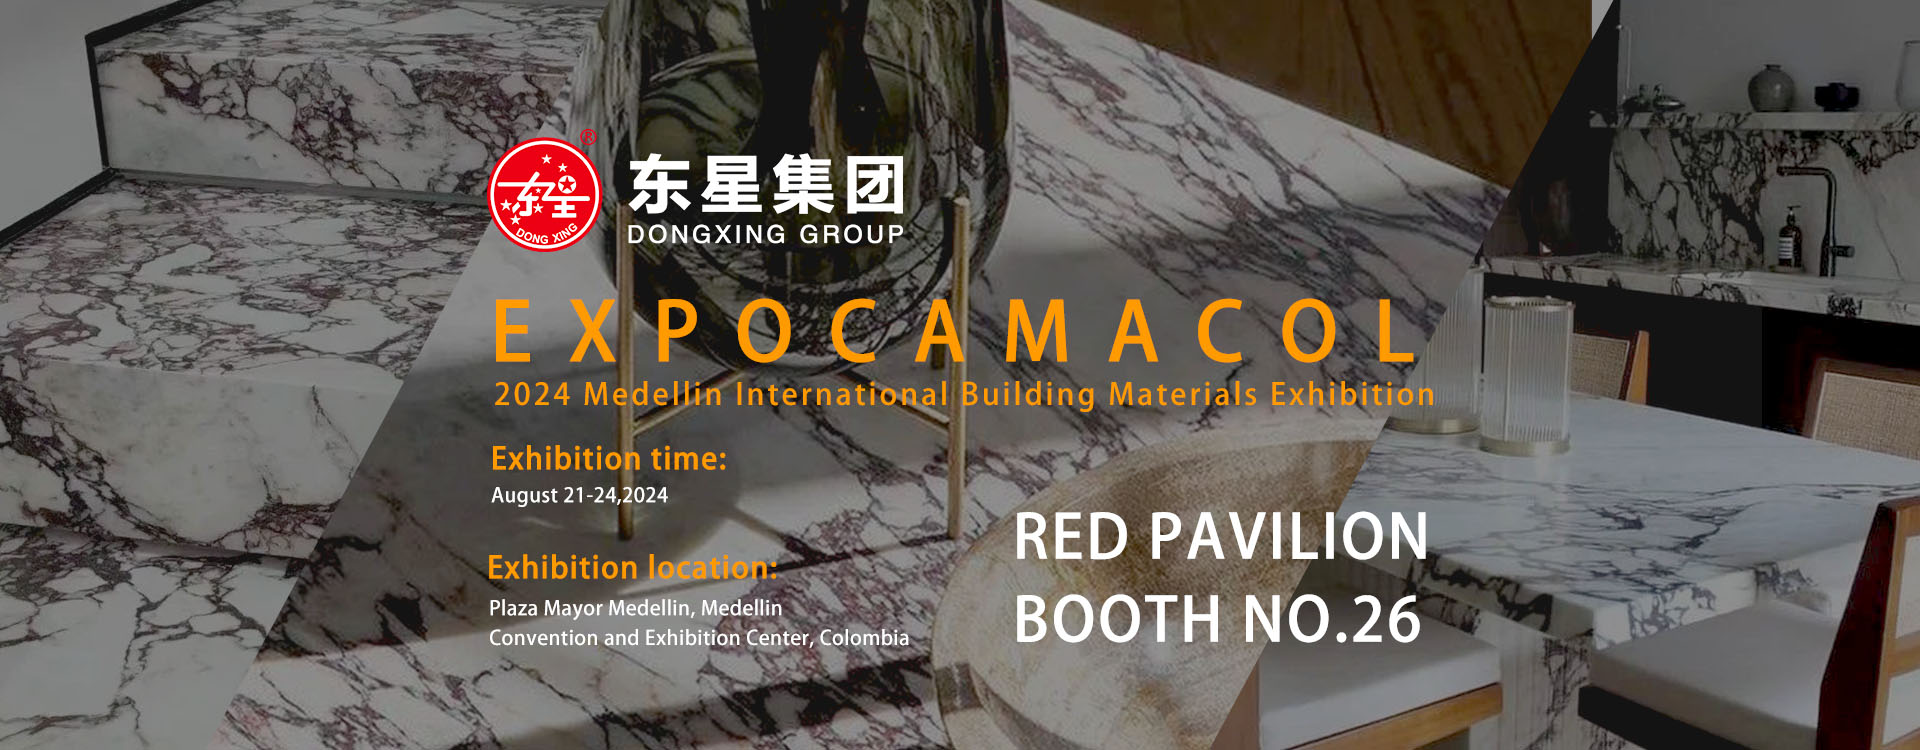 Il Gruppo Dongxing si unisce a EXPOCAMACOL 2024